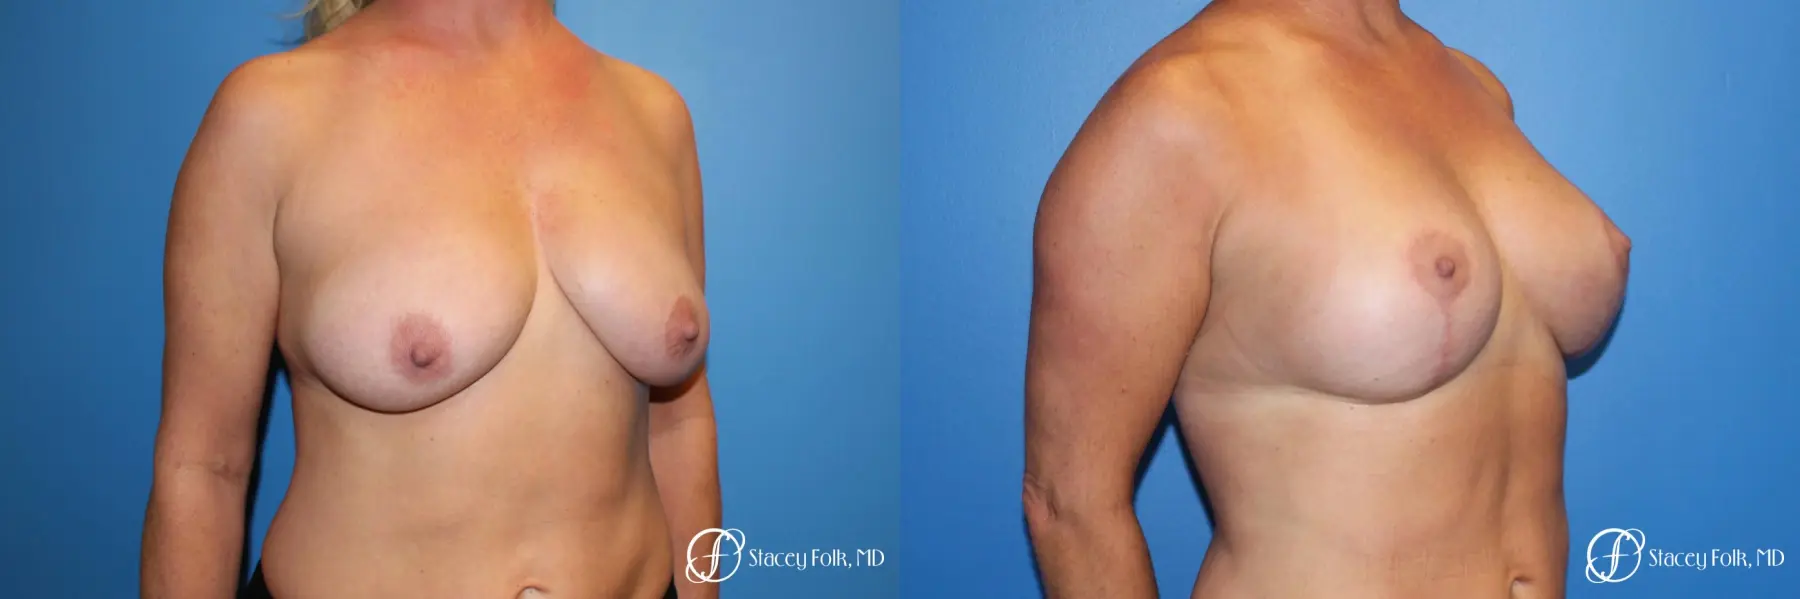 Denver Breast Lift 10252 - Before and After 4